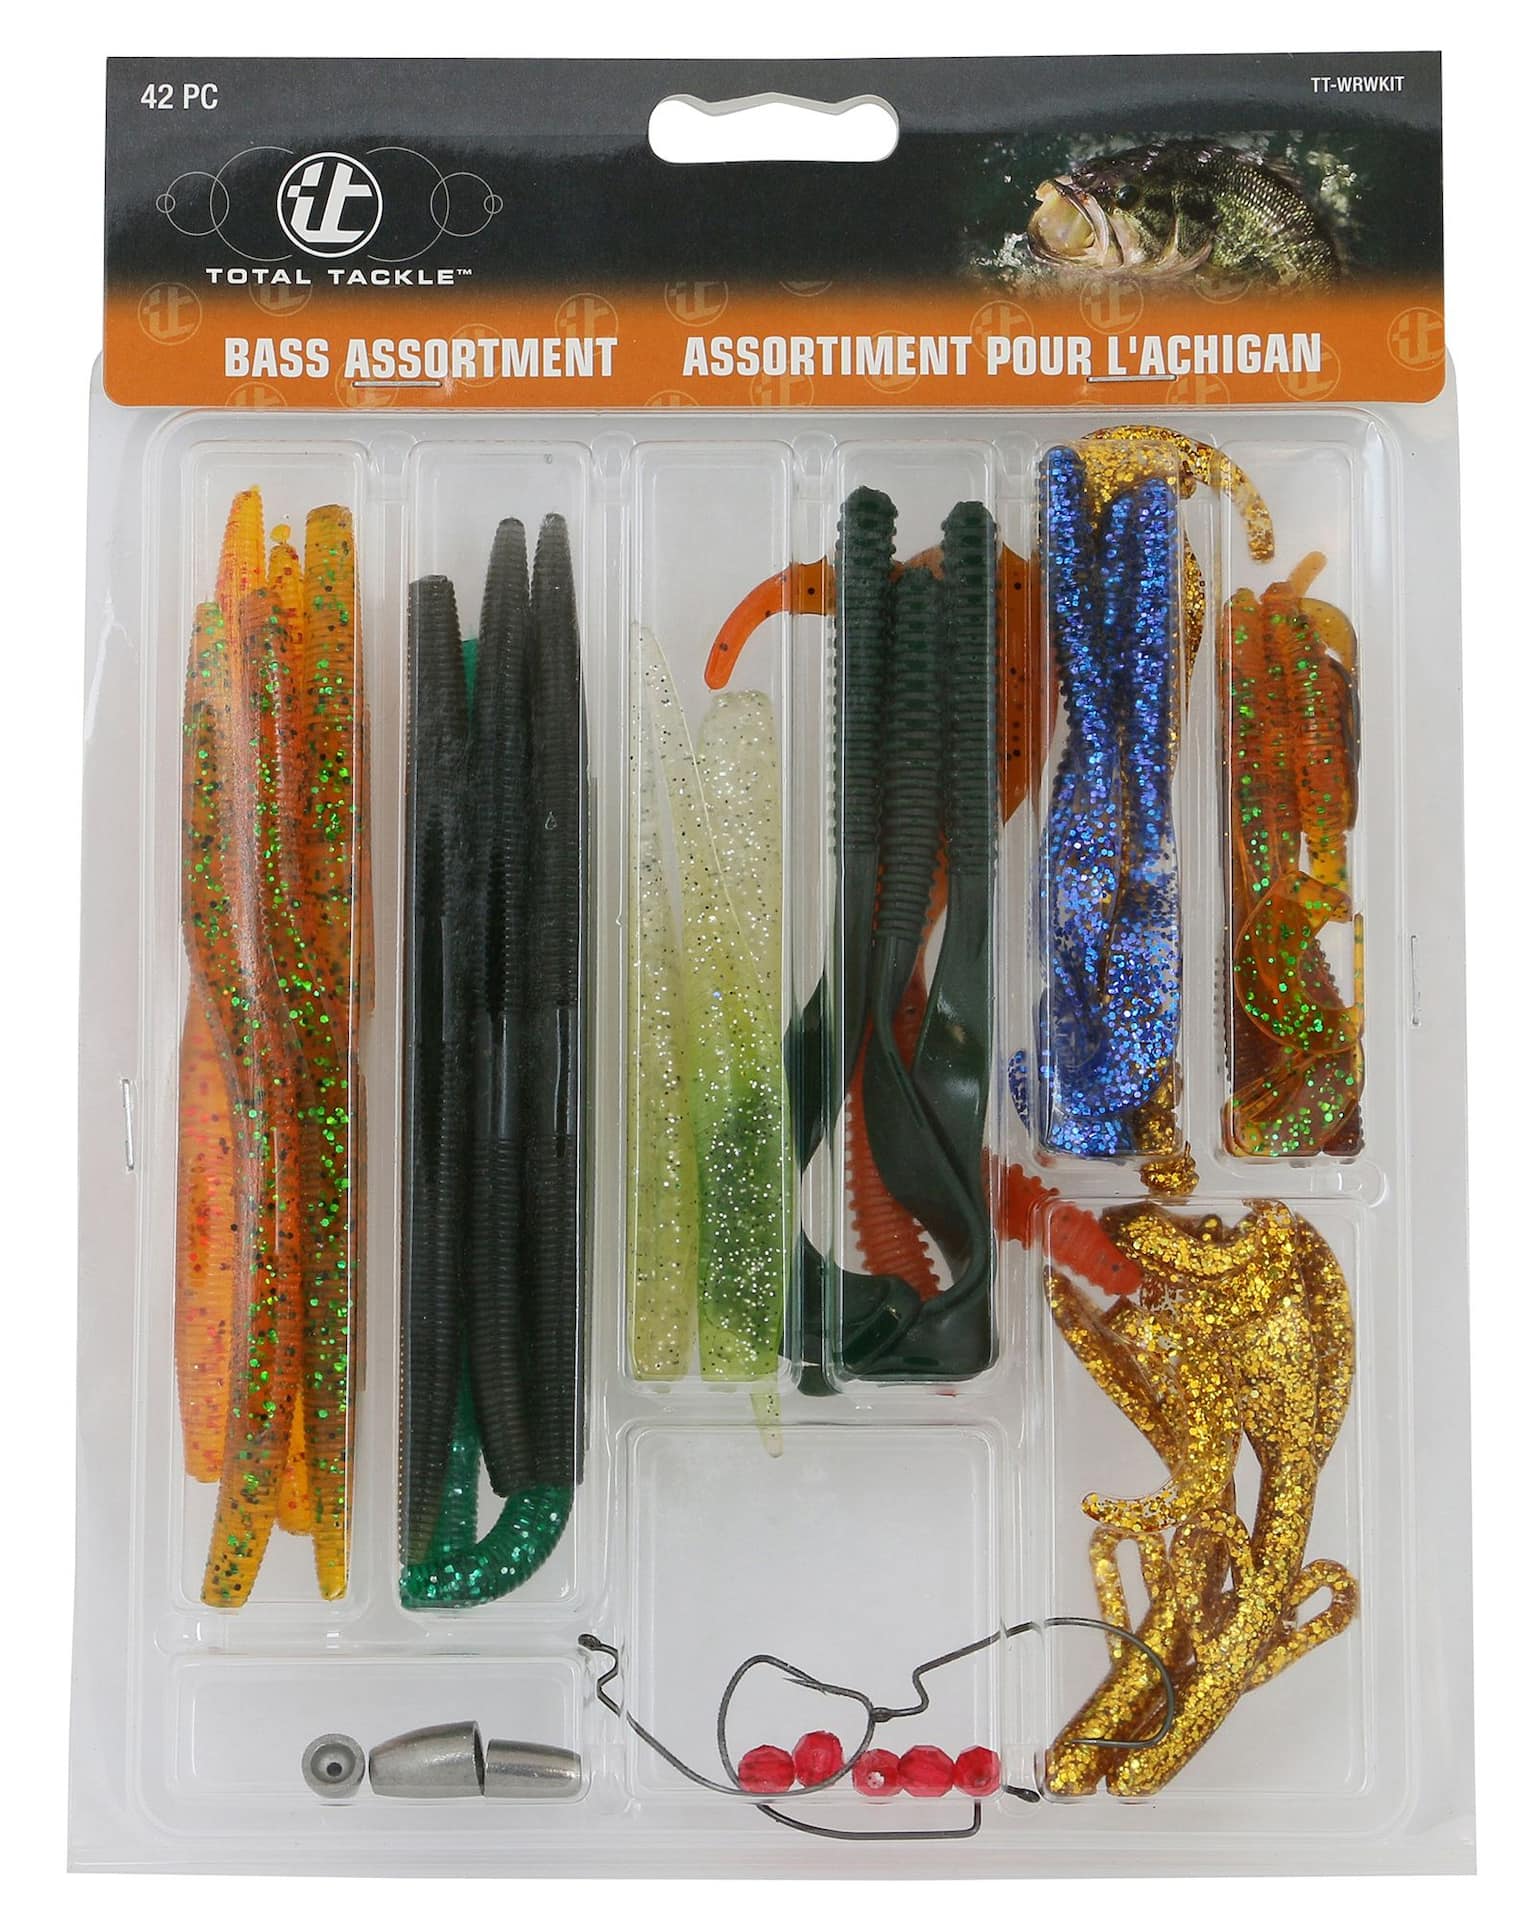 https://media-www.canadiantire.ca/product/playing/fishing/fishing-lures/0779880/total-tackle-lunker-worm-kit-df7ea4d7-cefc-49f2-bedc-d1144d8ea551-jpgrendition.jpg